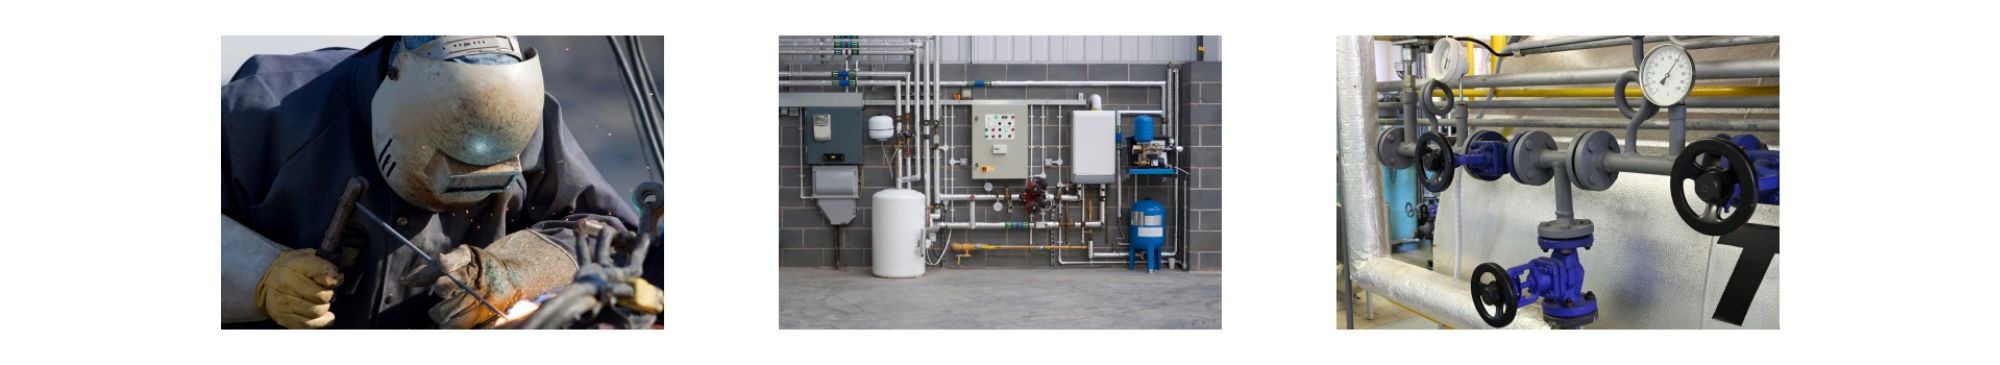 Commercial heating